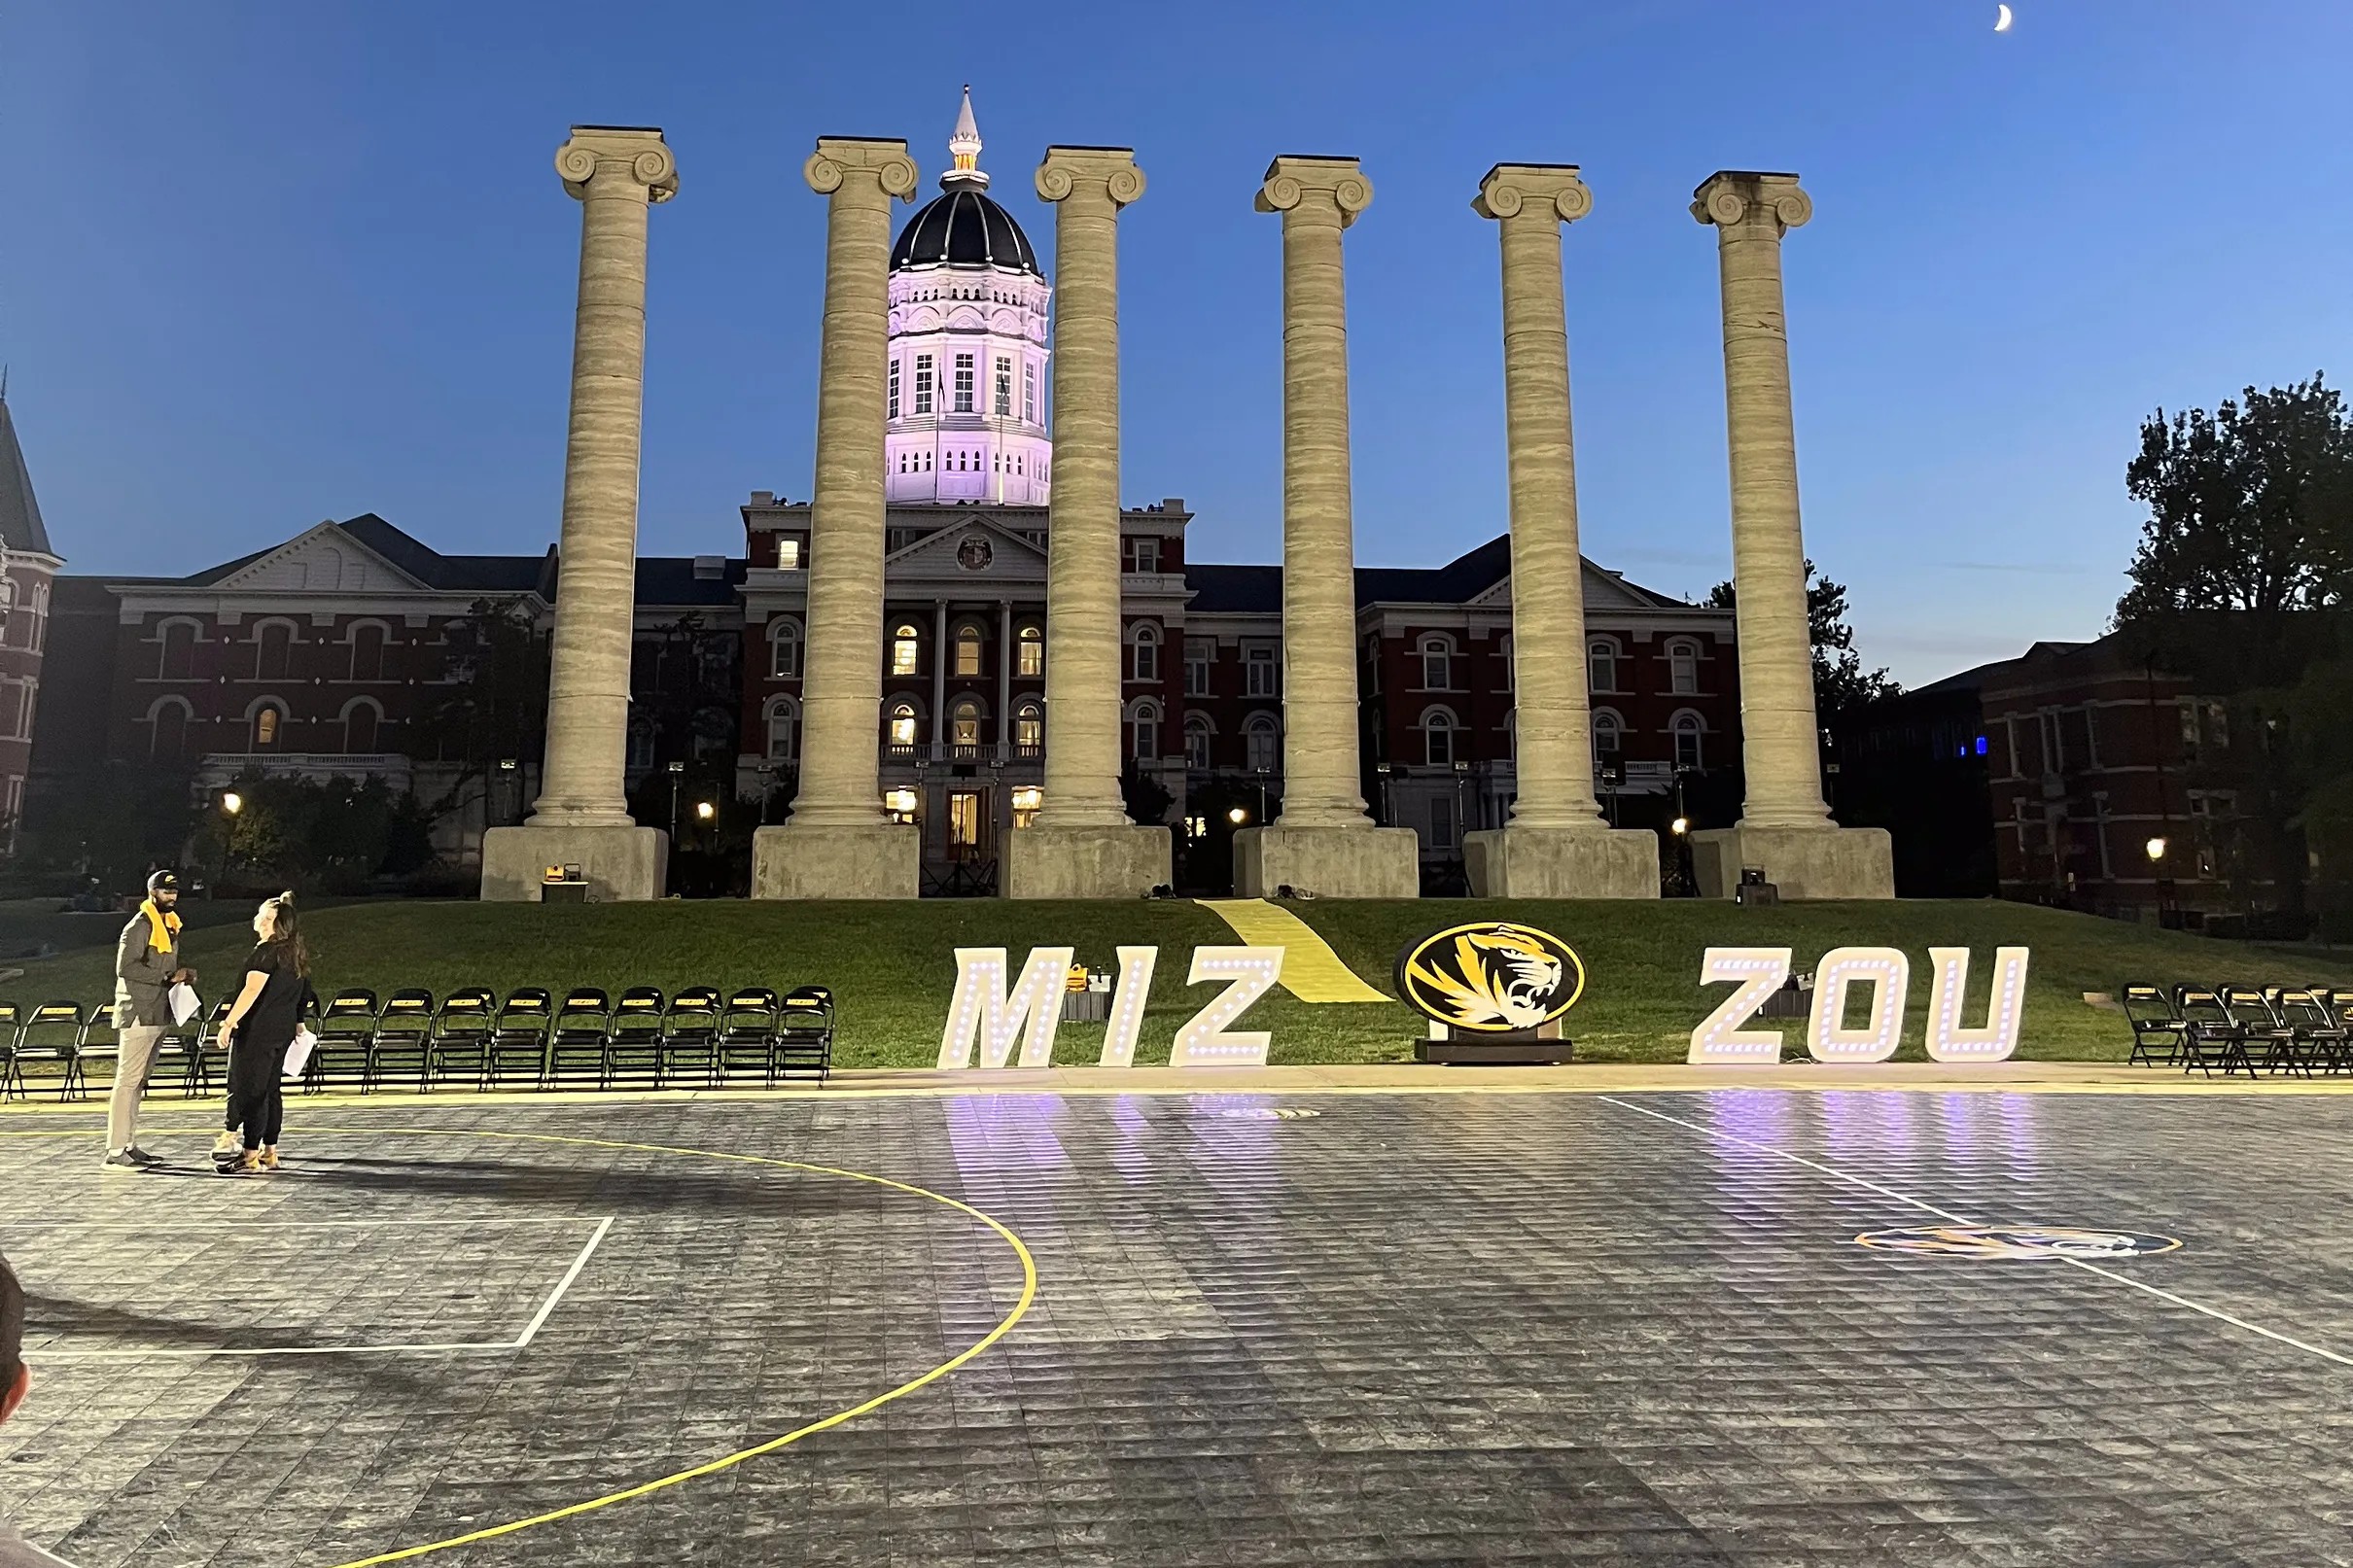 Mizzou Madness The first look at the Mizzou men’s and women’s